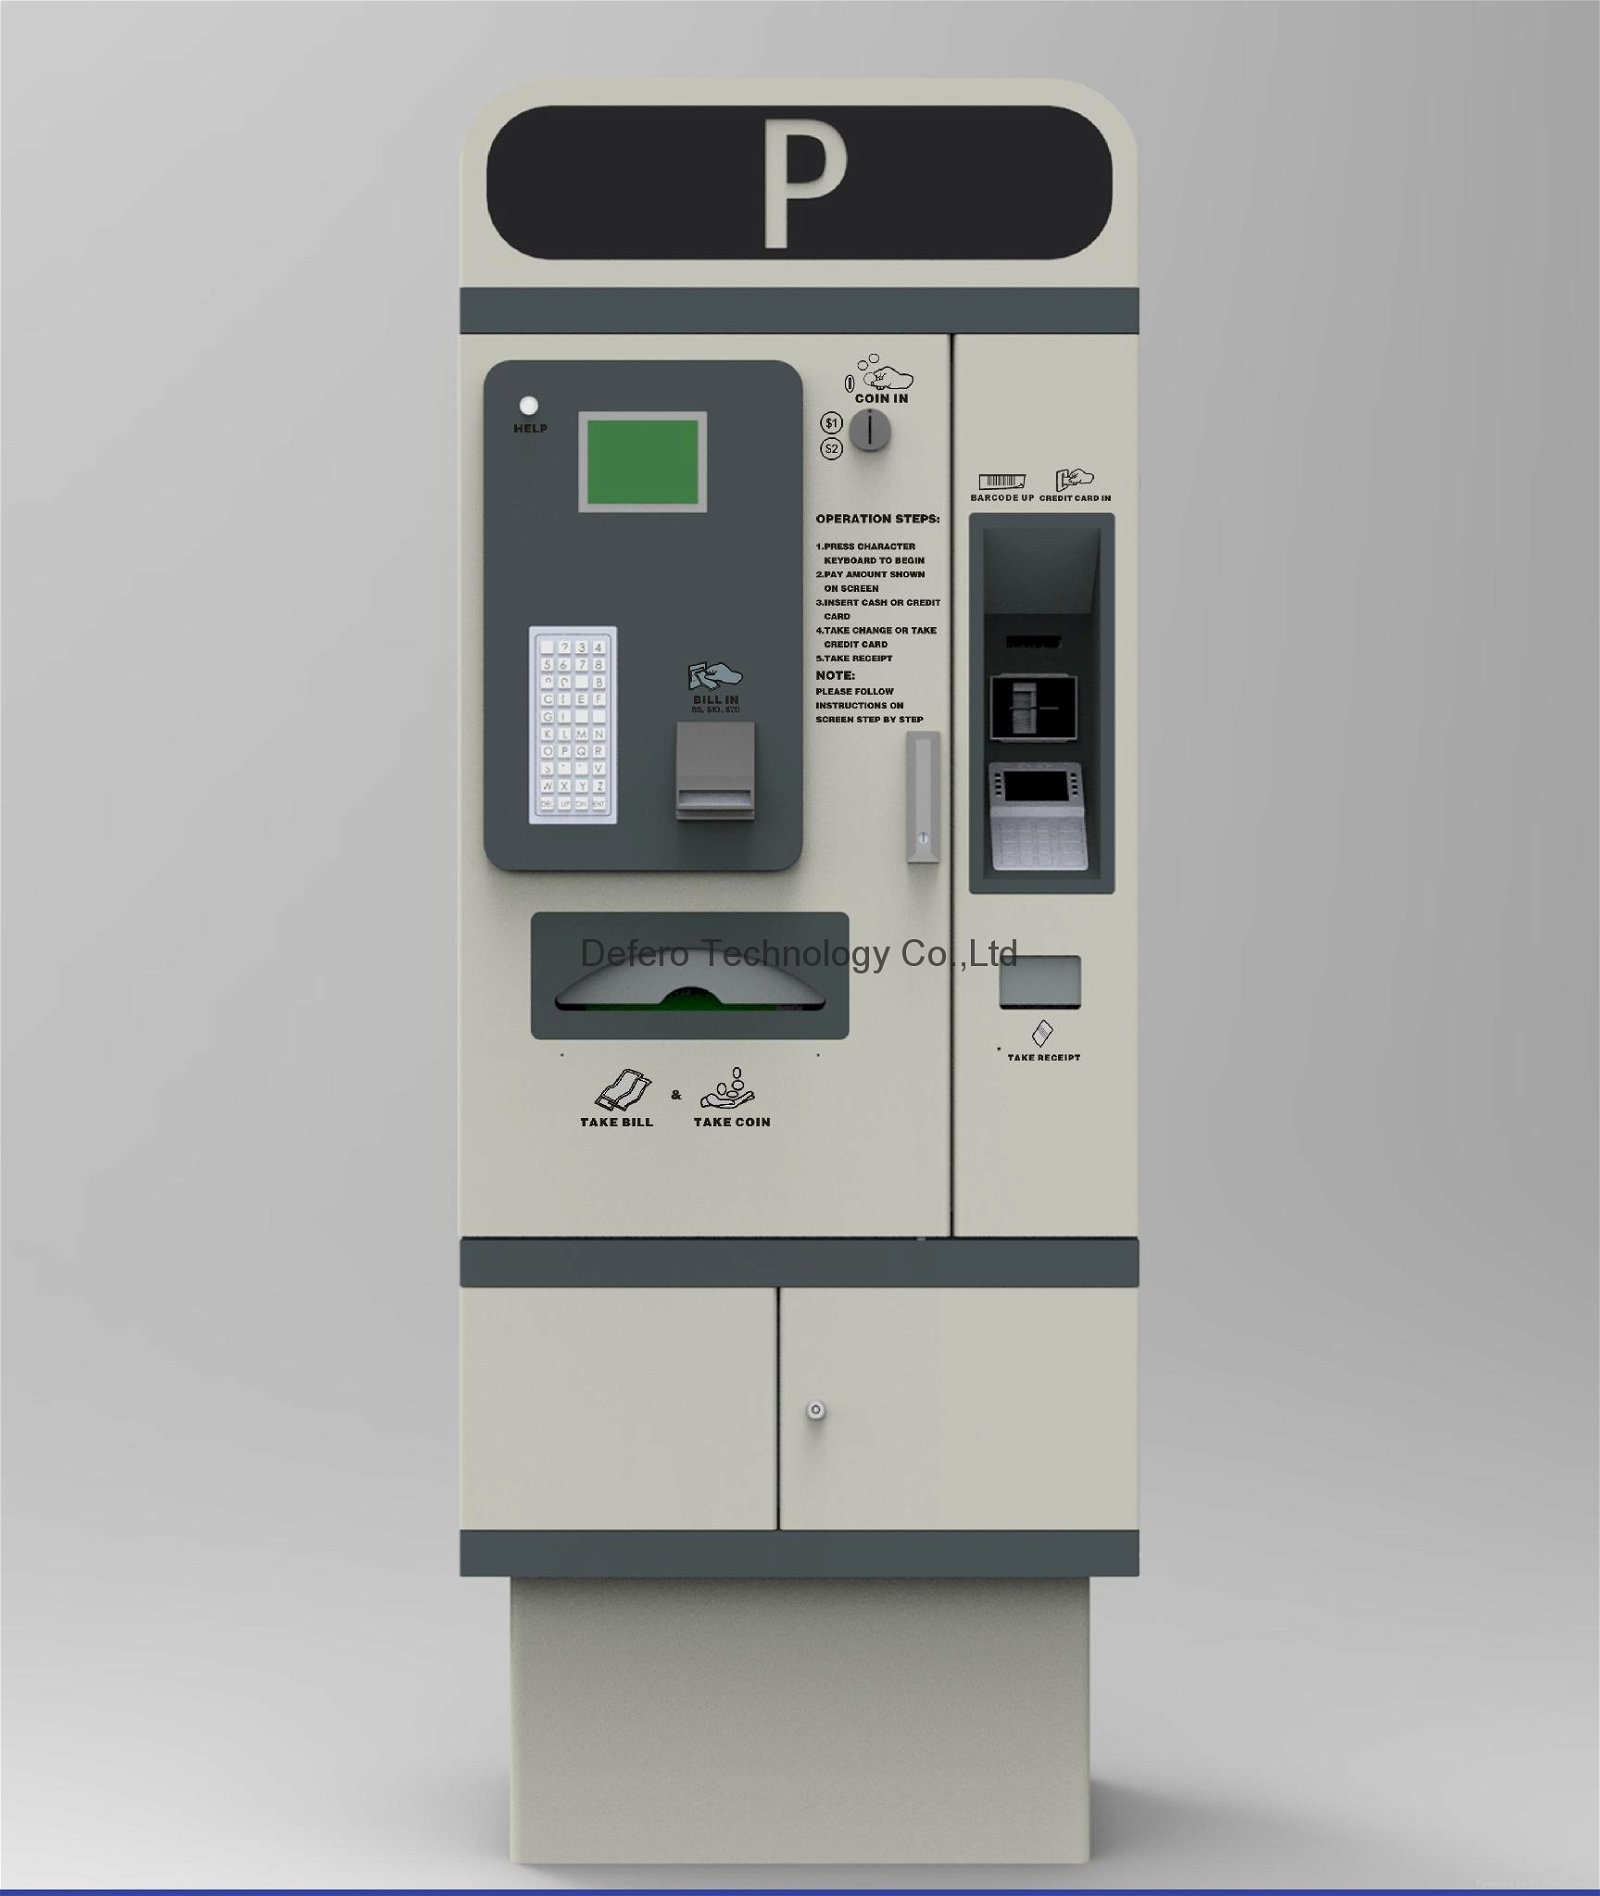 High quality automatic parking payment kiosk central parking meter